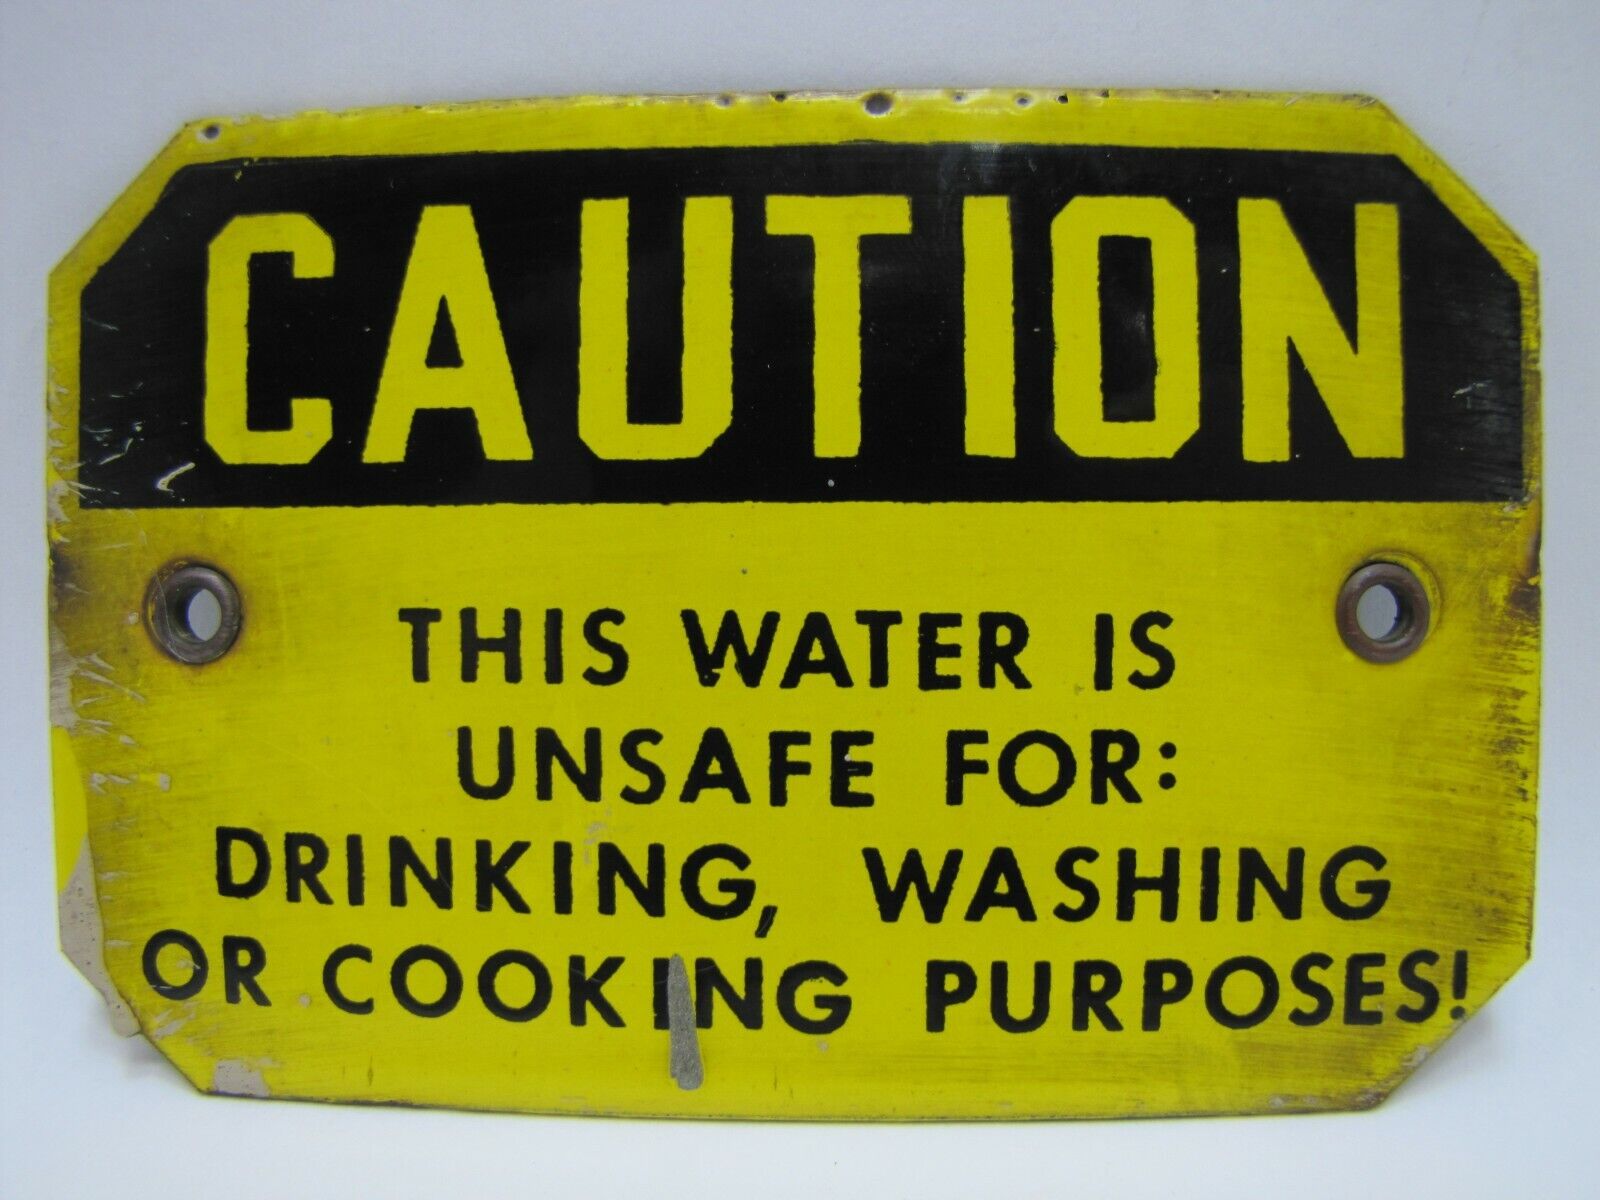 CAUTION WATER IS UNSAFE FOR DRINKING WASHING COOKING Old Porcelain Safety Sign